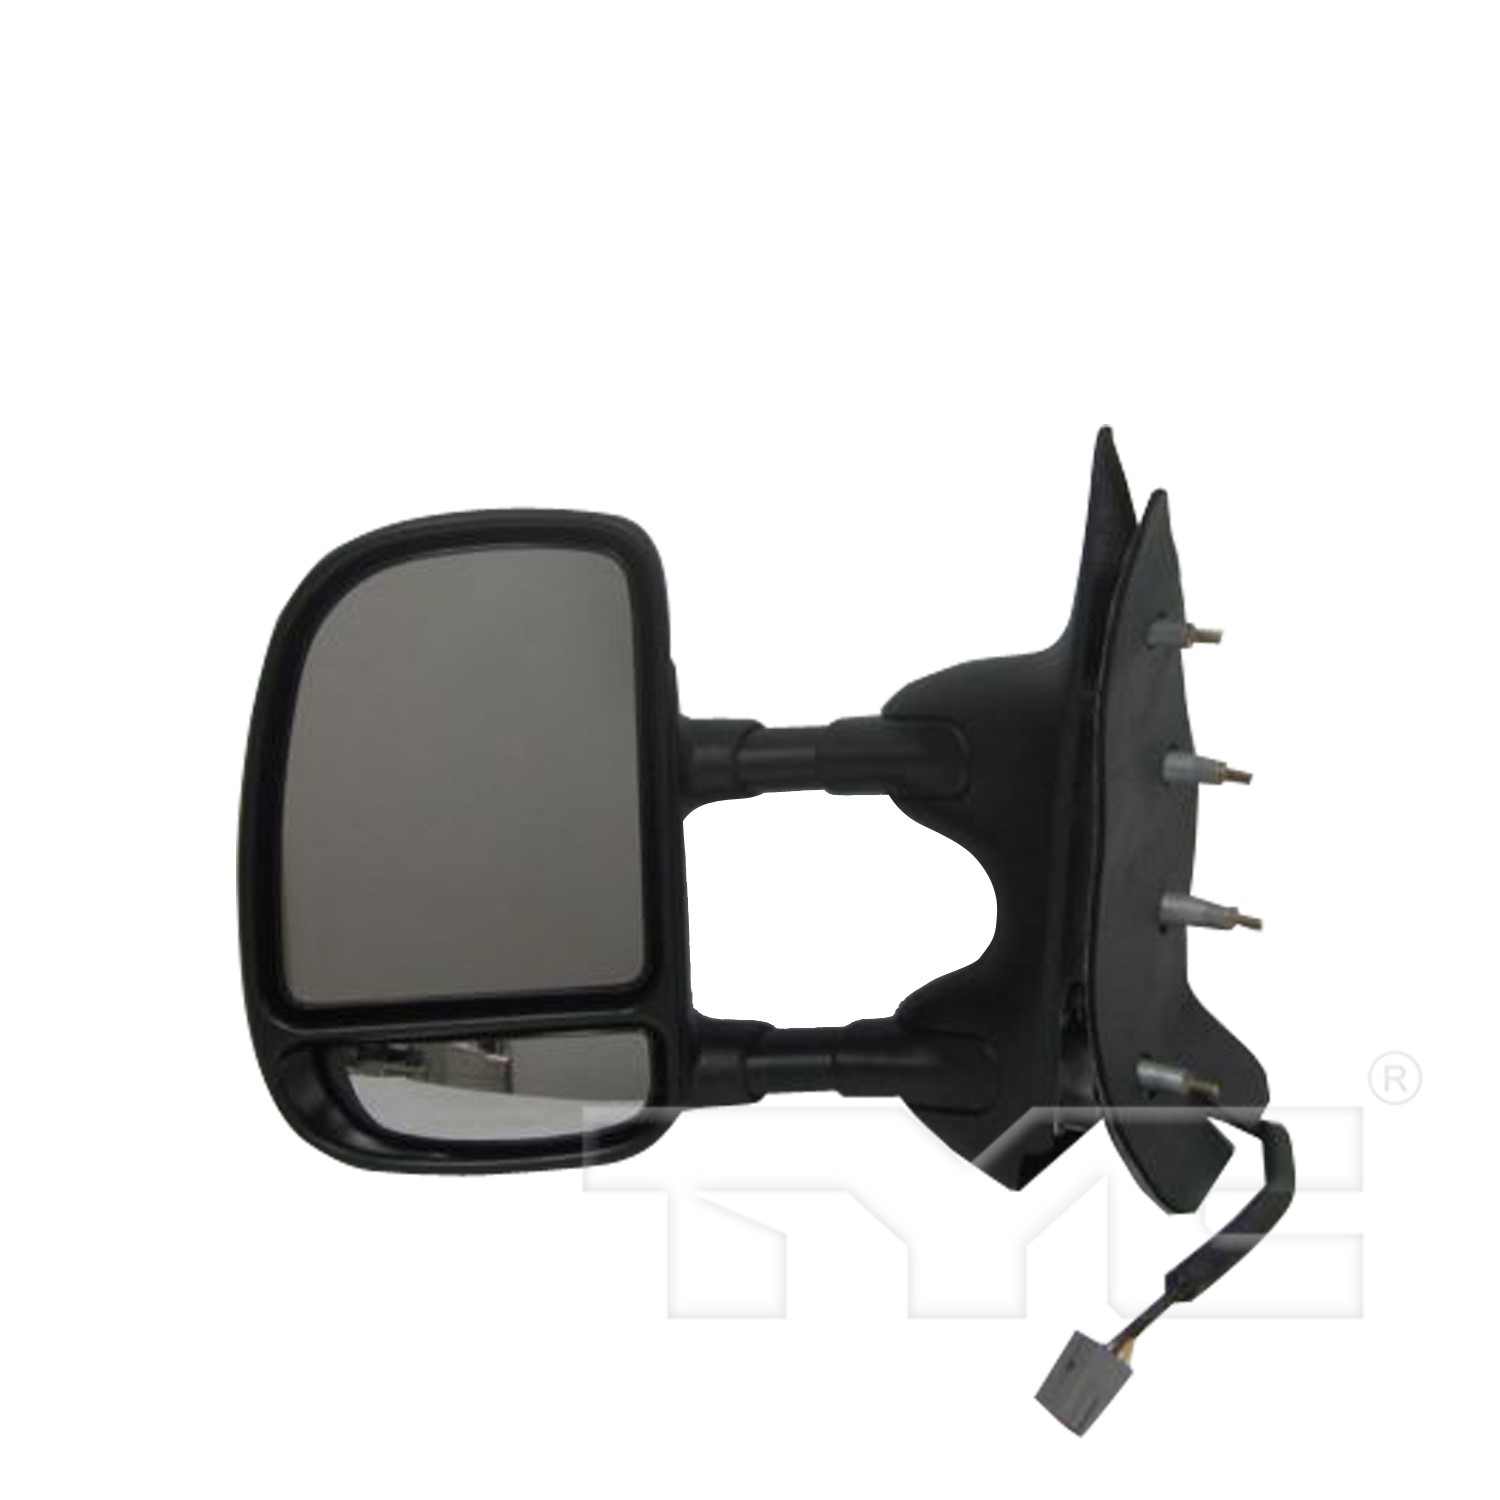 Aftermarket MIRRORS for FORD - E-350 SUPER DUTY, E-350 SUPER DUTY,09-21,LT Mirror outside rear view